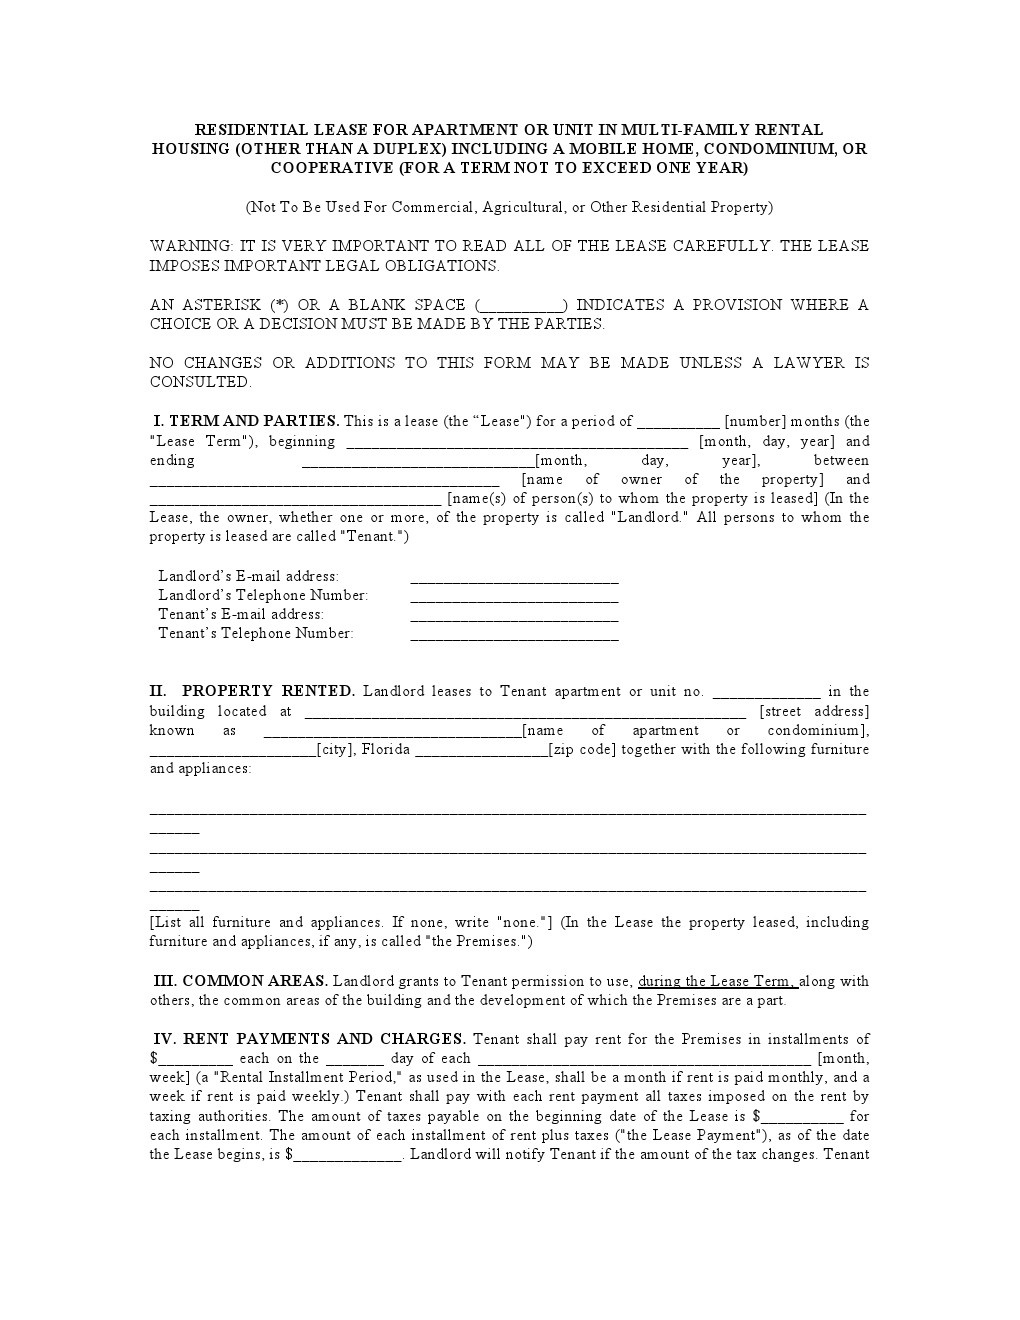 Download Free Florida Residential Lease Agreement - Printable Lease - Free Printable Florida Residential Lease Agreement